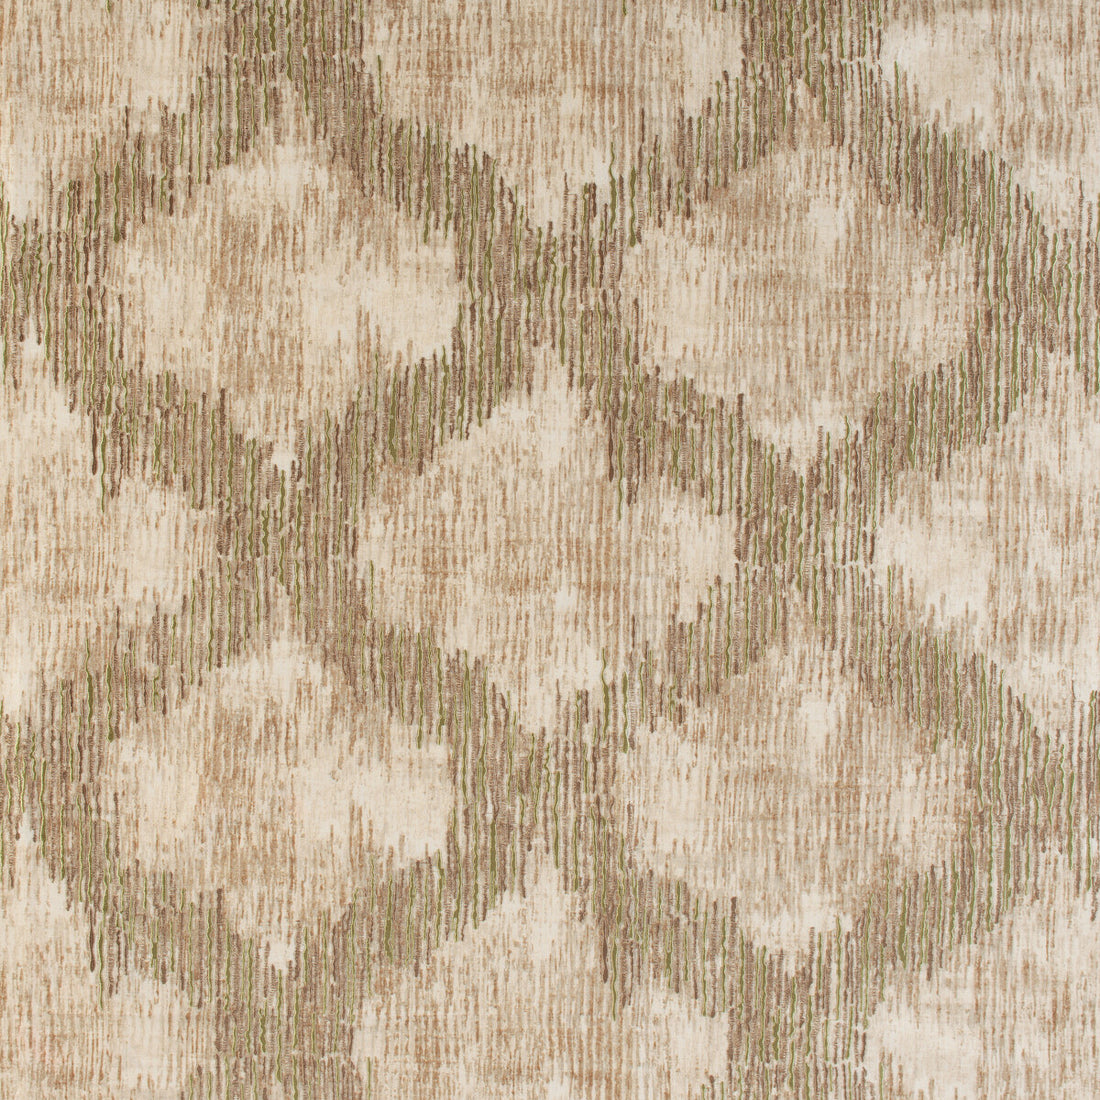 Shimmersea fabric in brine color - pattern SHIMMERSEA.316.0 - by Kravet Design in the Barbara Barry Home Midsummer collection